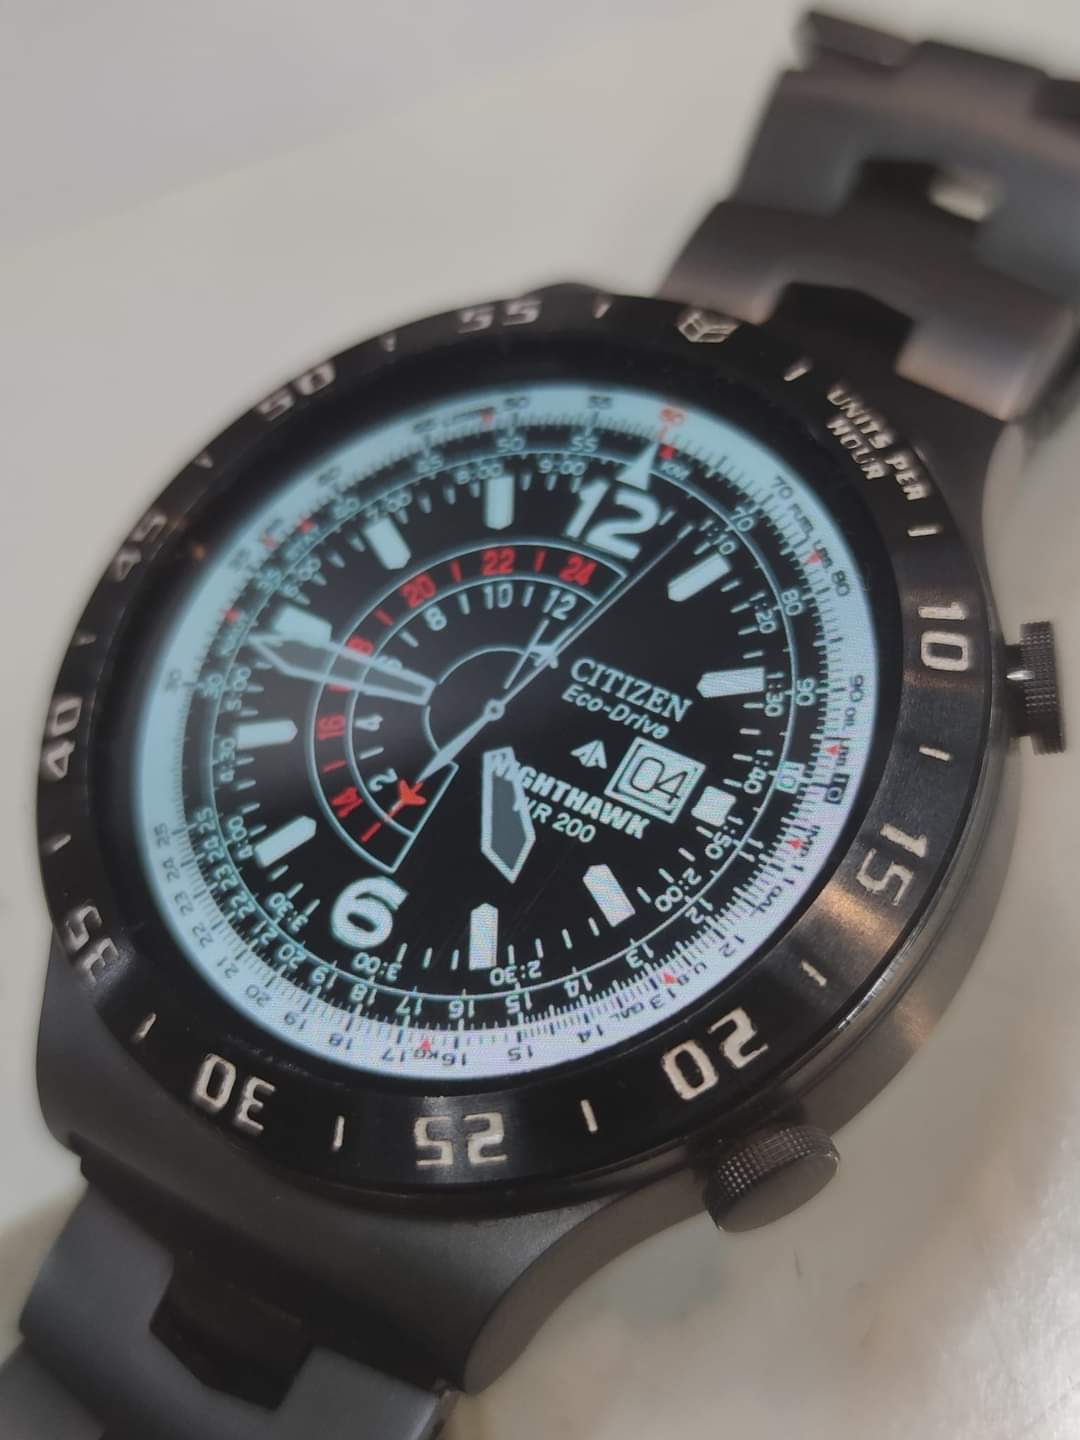 Citizen Eco drive Nighthawk realistic HQ ported watch face theme